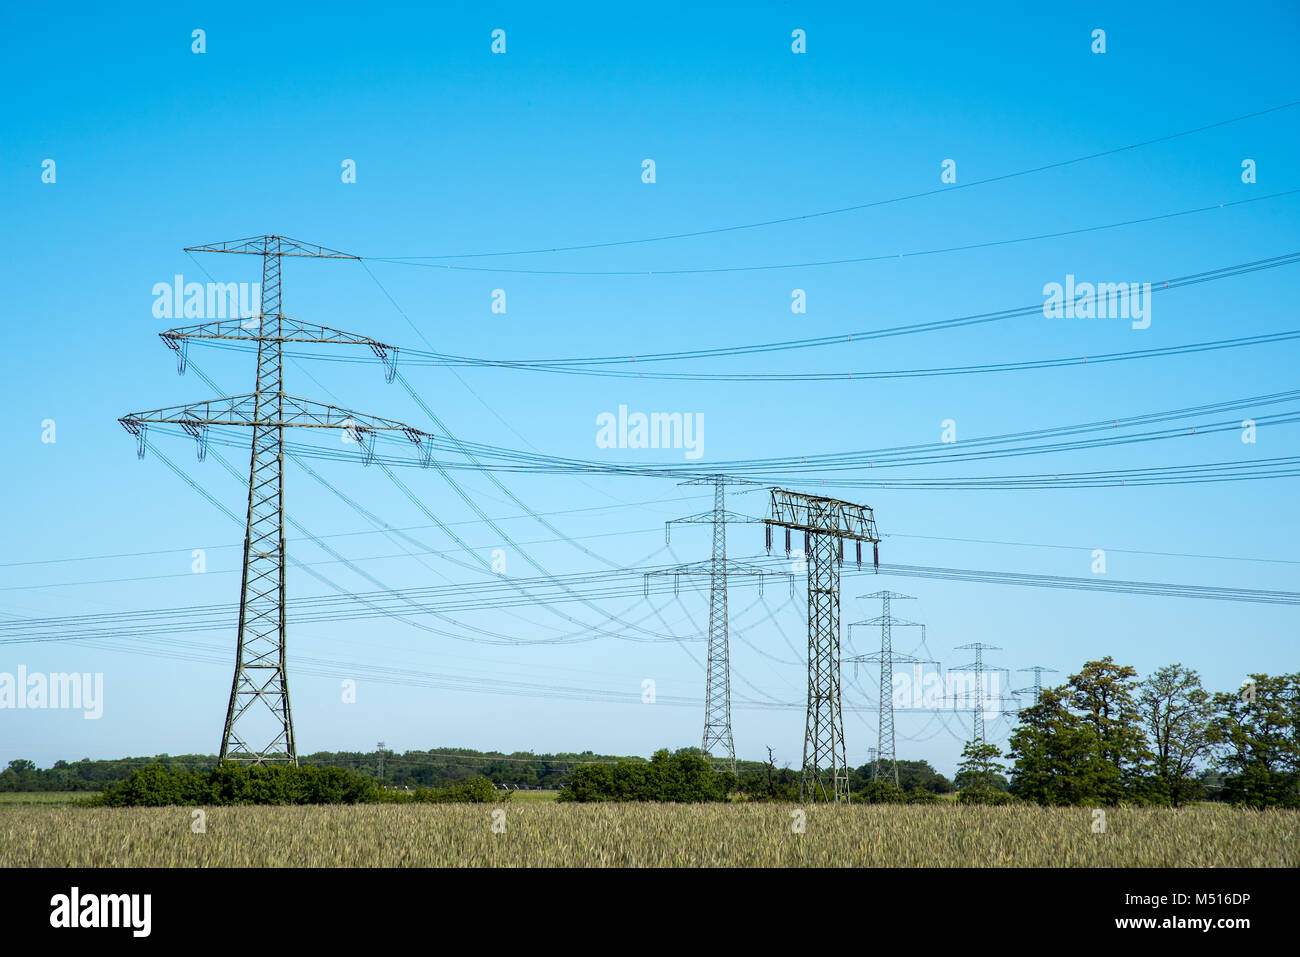 Electric pylons and transmission lines seen in Germany Stock Photo